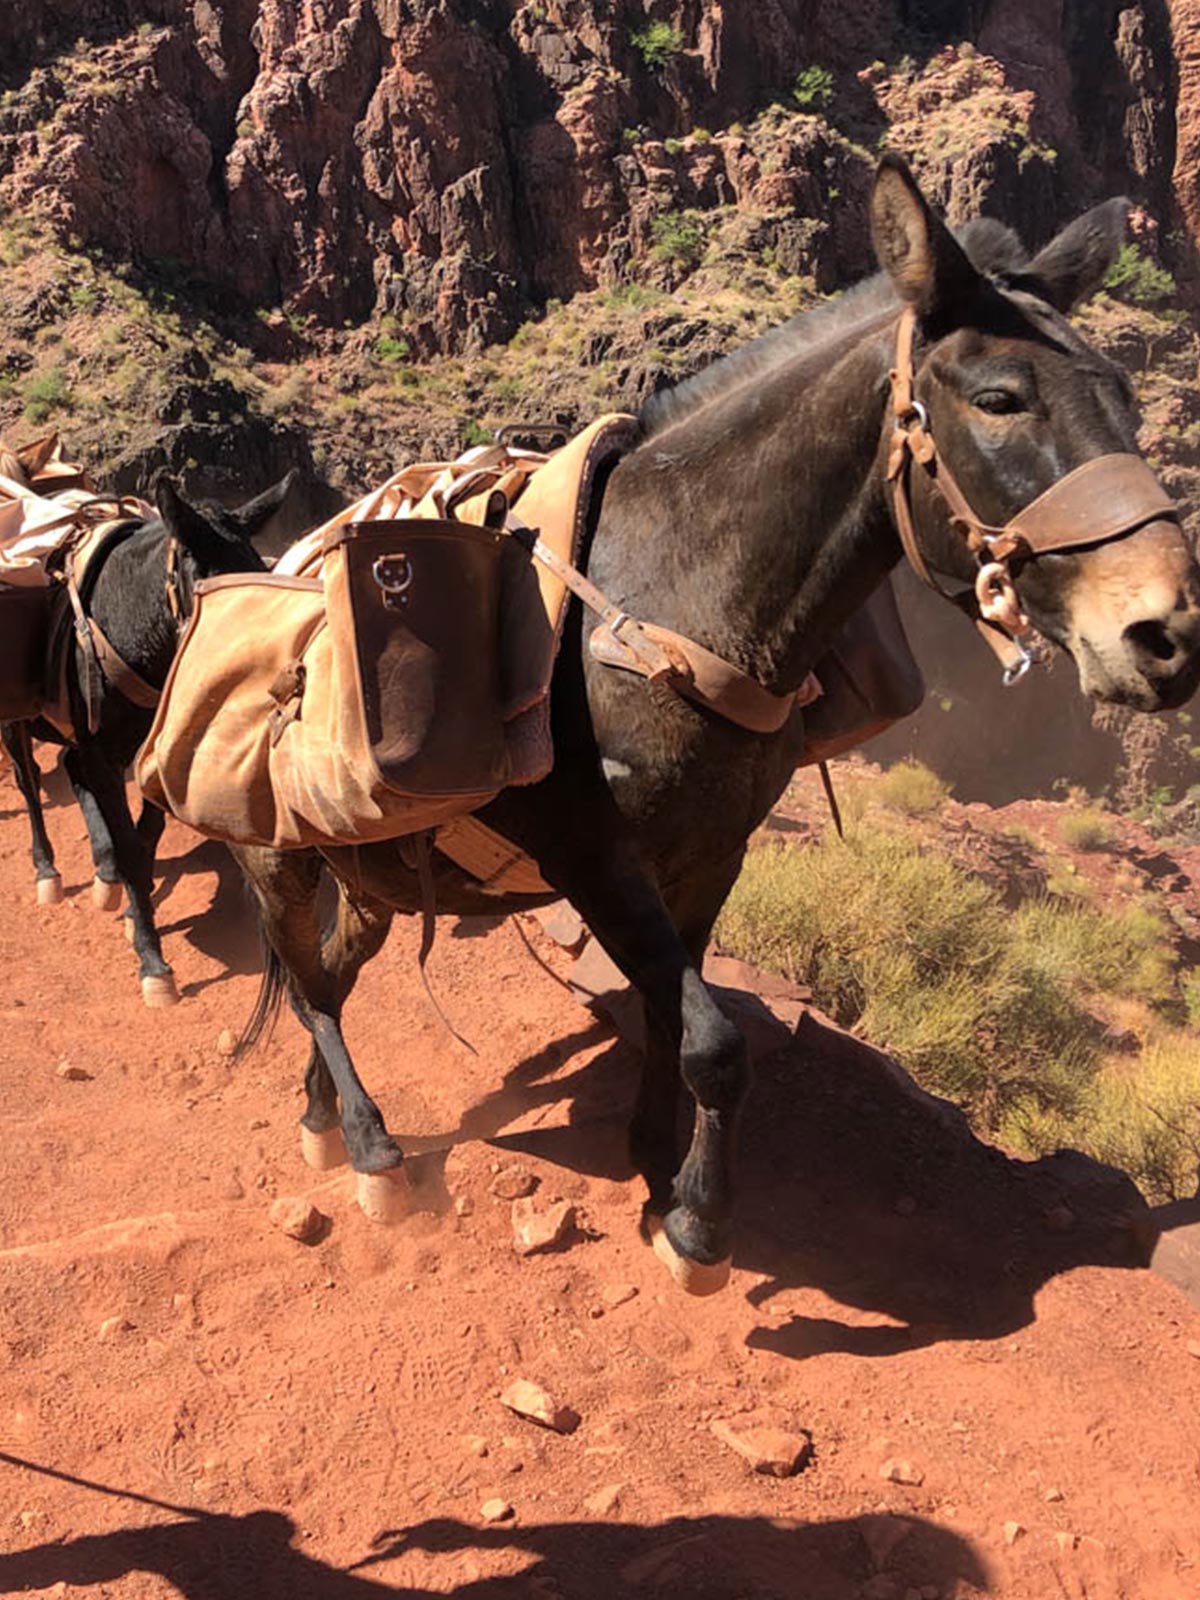 Mule carrying bags on North Kaibab Trail on Grand Canyon Rim to Rim.